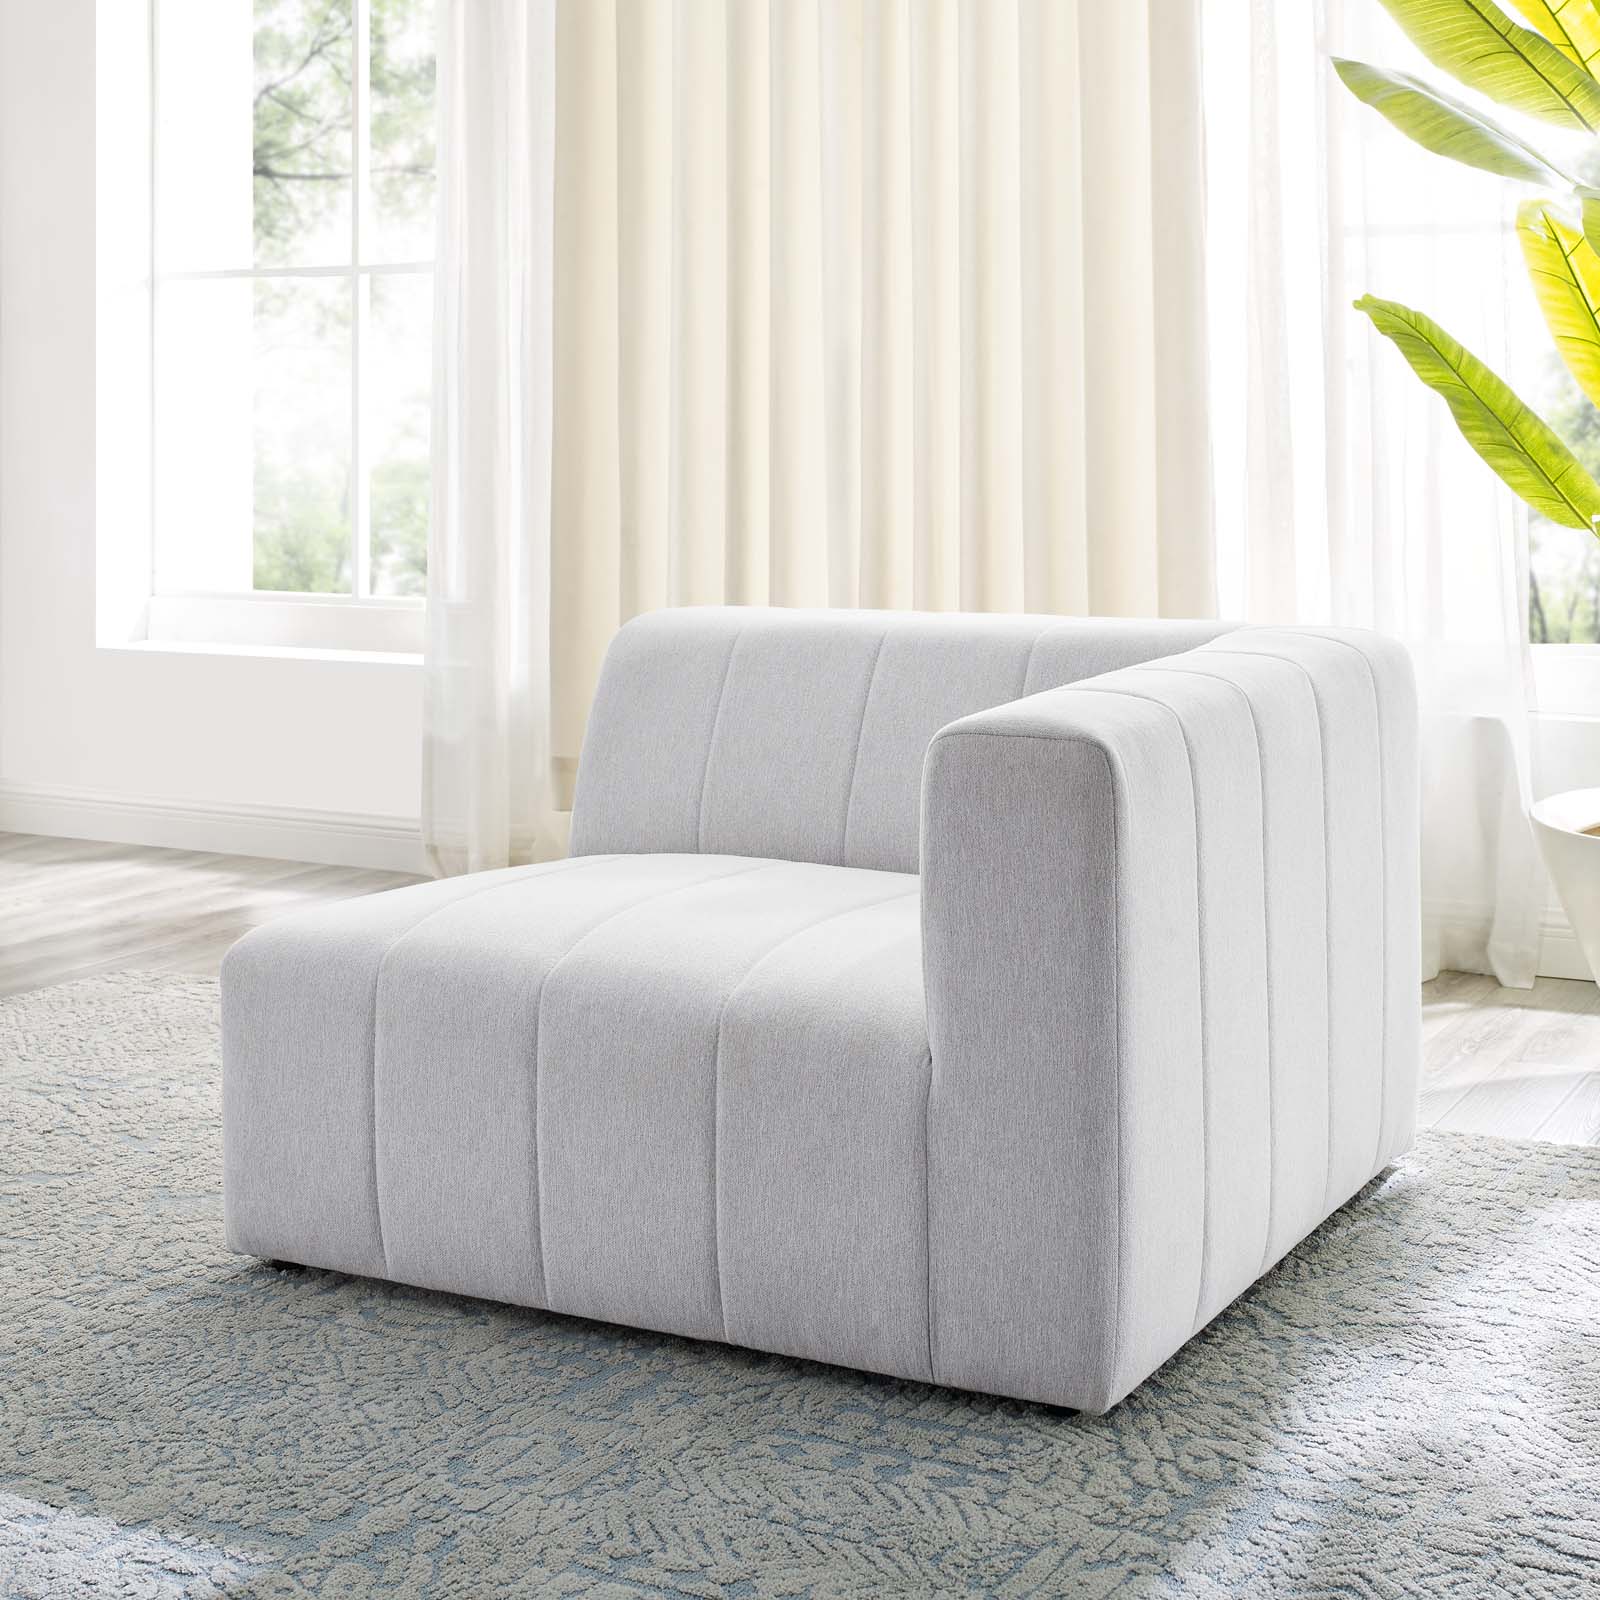 Bartlett Upholstered Fabric Right-Arm Chair - East Shore Modern Home Furnishings